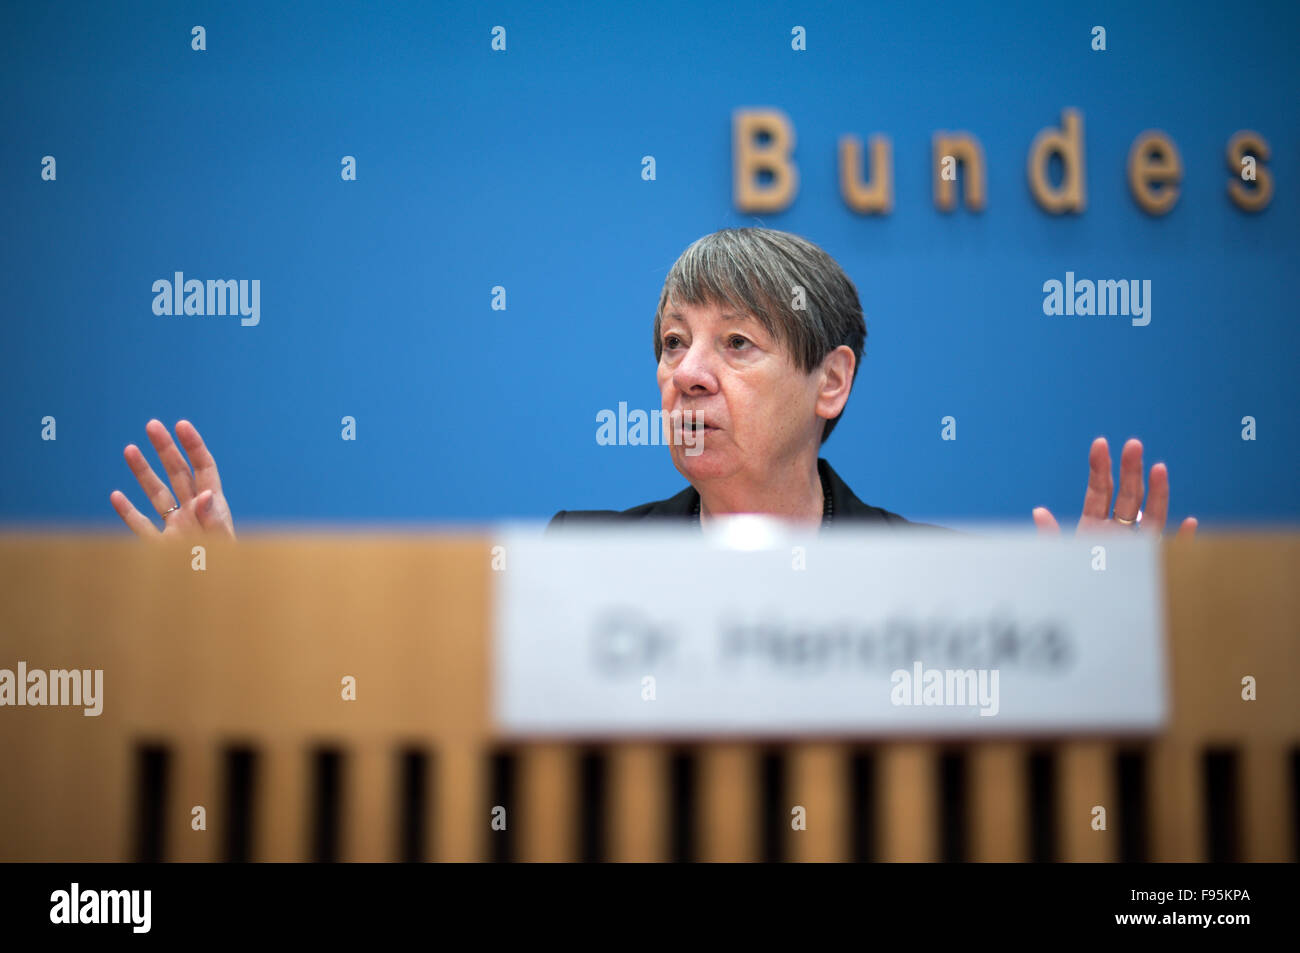 Berlin, Germany. 14th Dec, 2015. German Environmental Minister Barbara Hendricks speaks about the results of the UN Climate Change Conference in Paris at a press conference in Berlin, Germany, 14 December 2015. After two weeks of negotiations, almost every state in the world settled on a historic climate protection agreement, the main goal of which is to hold the global warming caused by greenhouse gases to well below two degrees celsius. Photo: BERND VON JUTRCZENKA/dpa/Alamy Live News Stock Photo